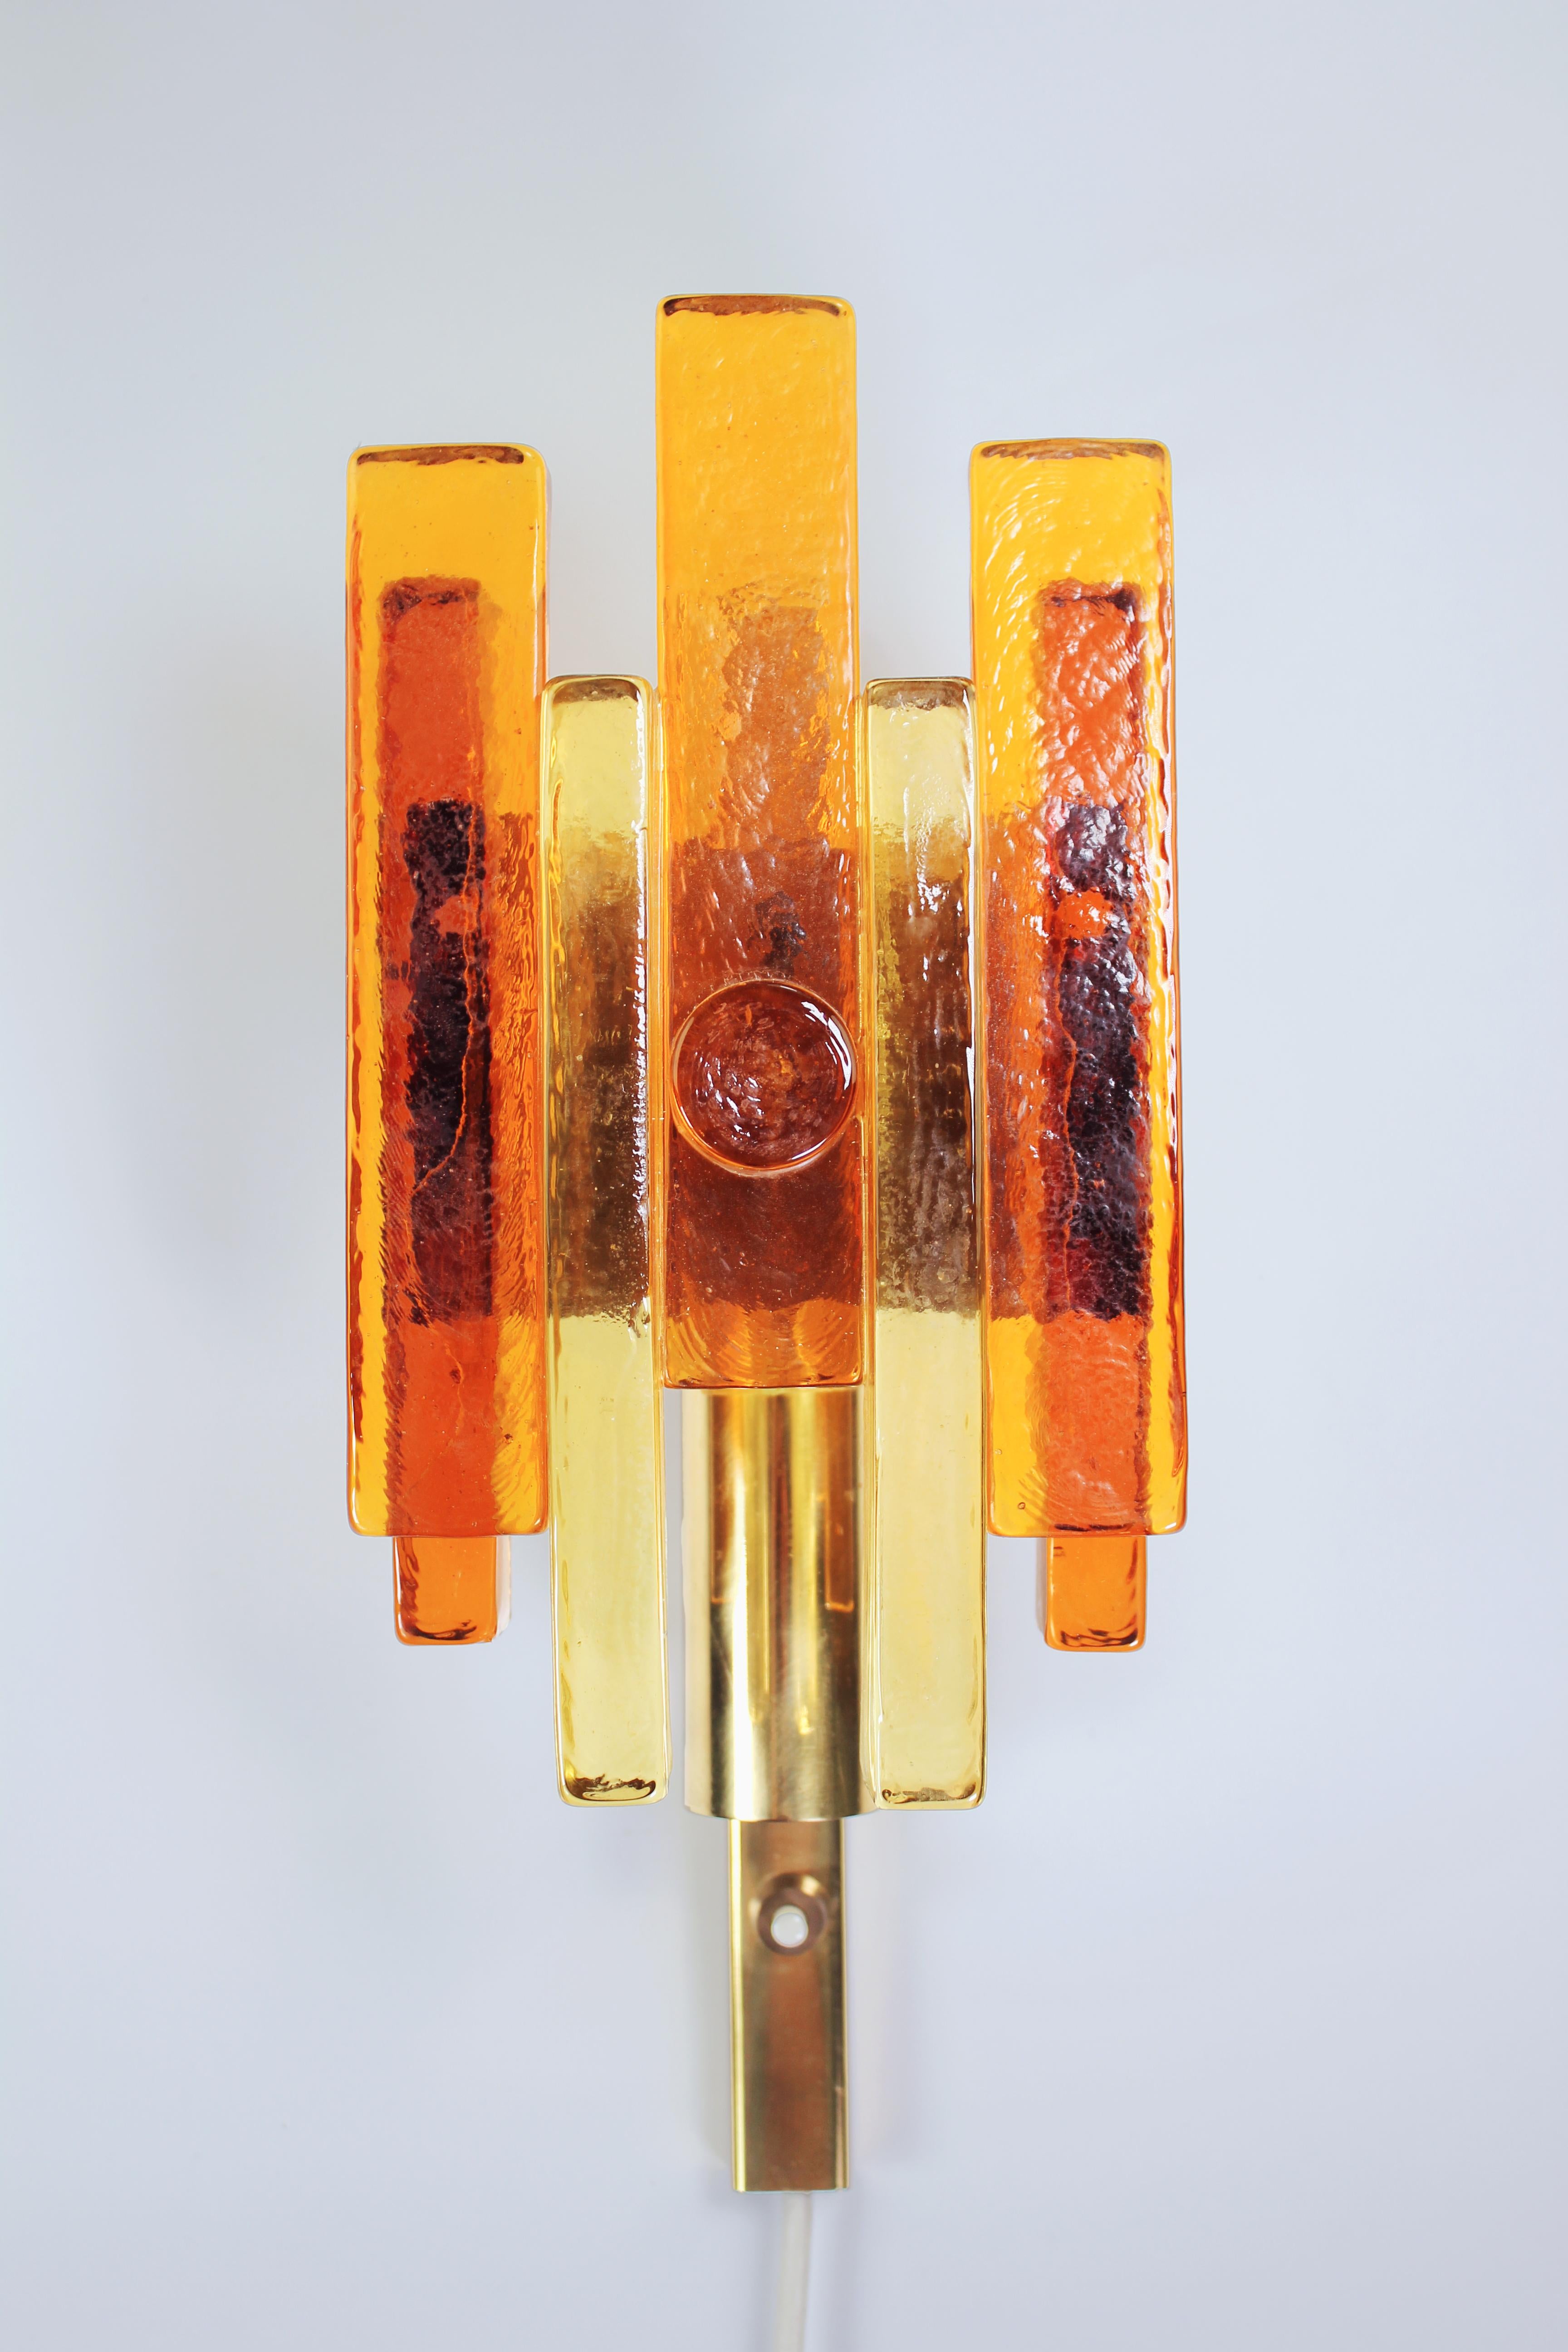 Danish modern tinted solid glass wall light by Svend Aage Holm Sørensen for Hassel & Teudt. Solid and heavy amber and yellow golden glass sticks stacked in symmetrical pattern with a circle in the center, all on polished golden metal mount. Designed